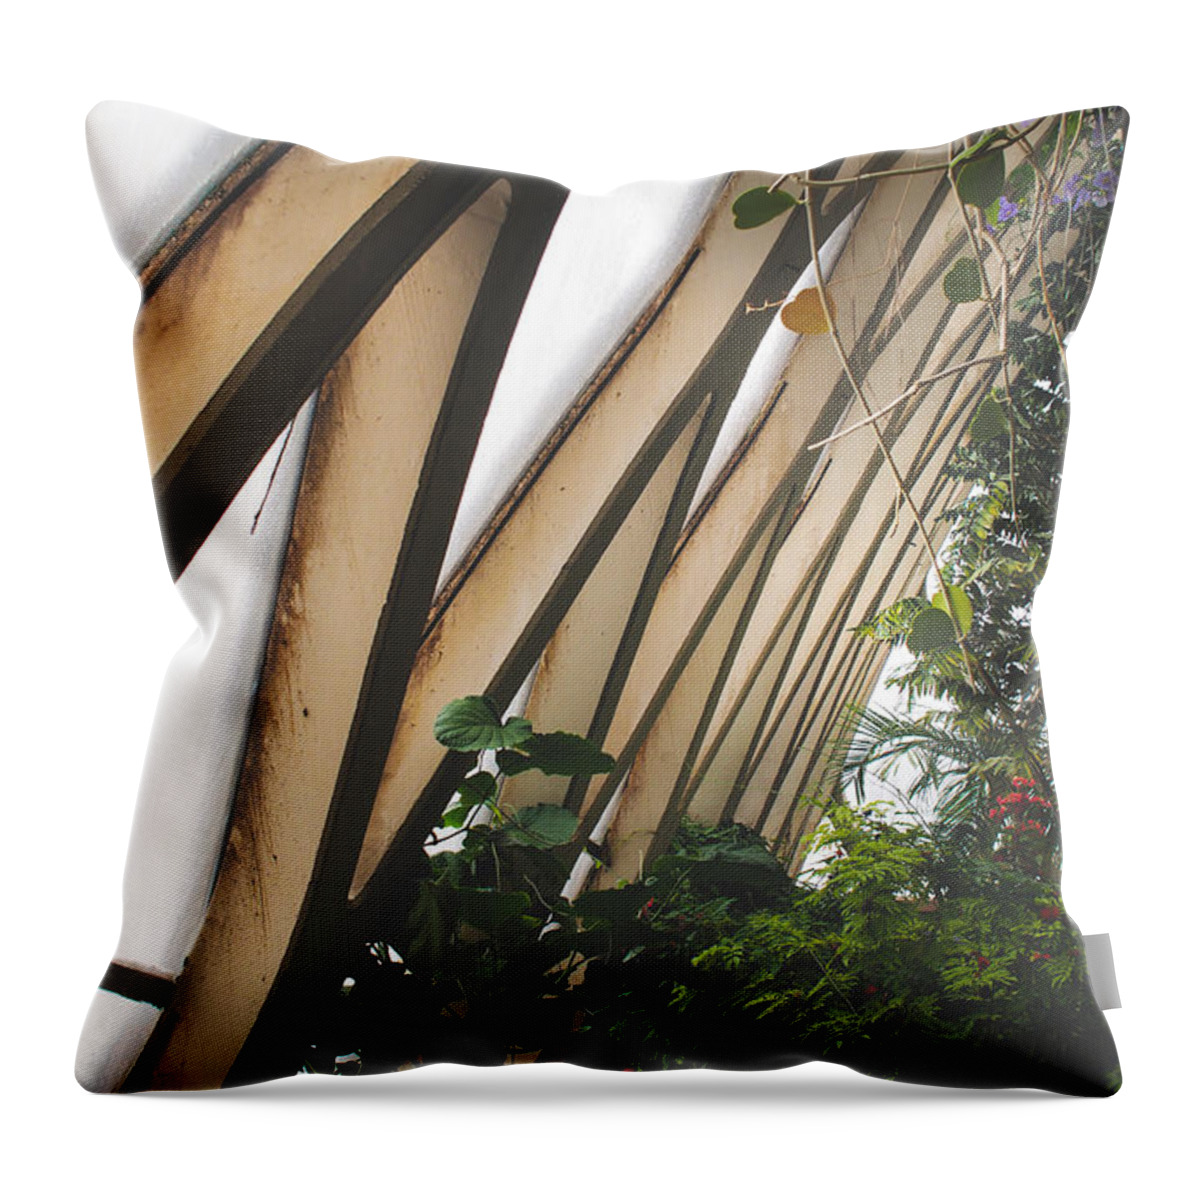 Lines Throw Pillow featuring the photograph Jungle Lines by Alex Leaming